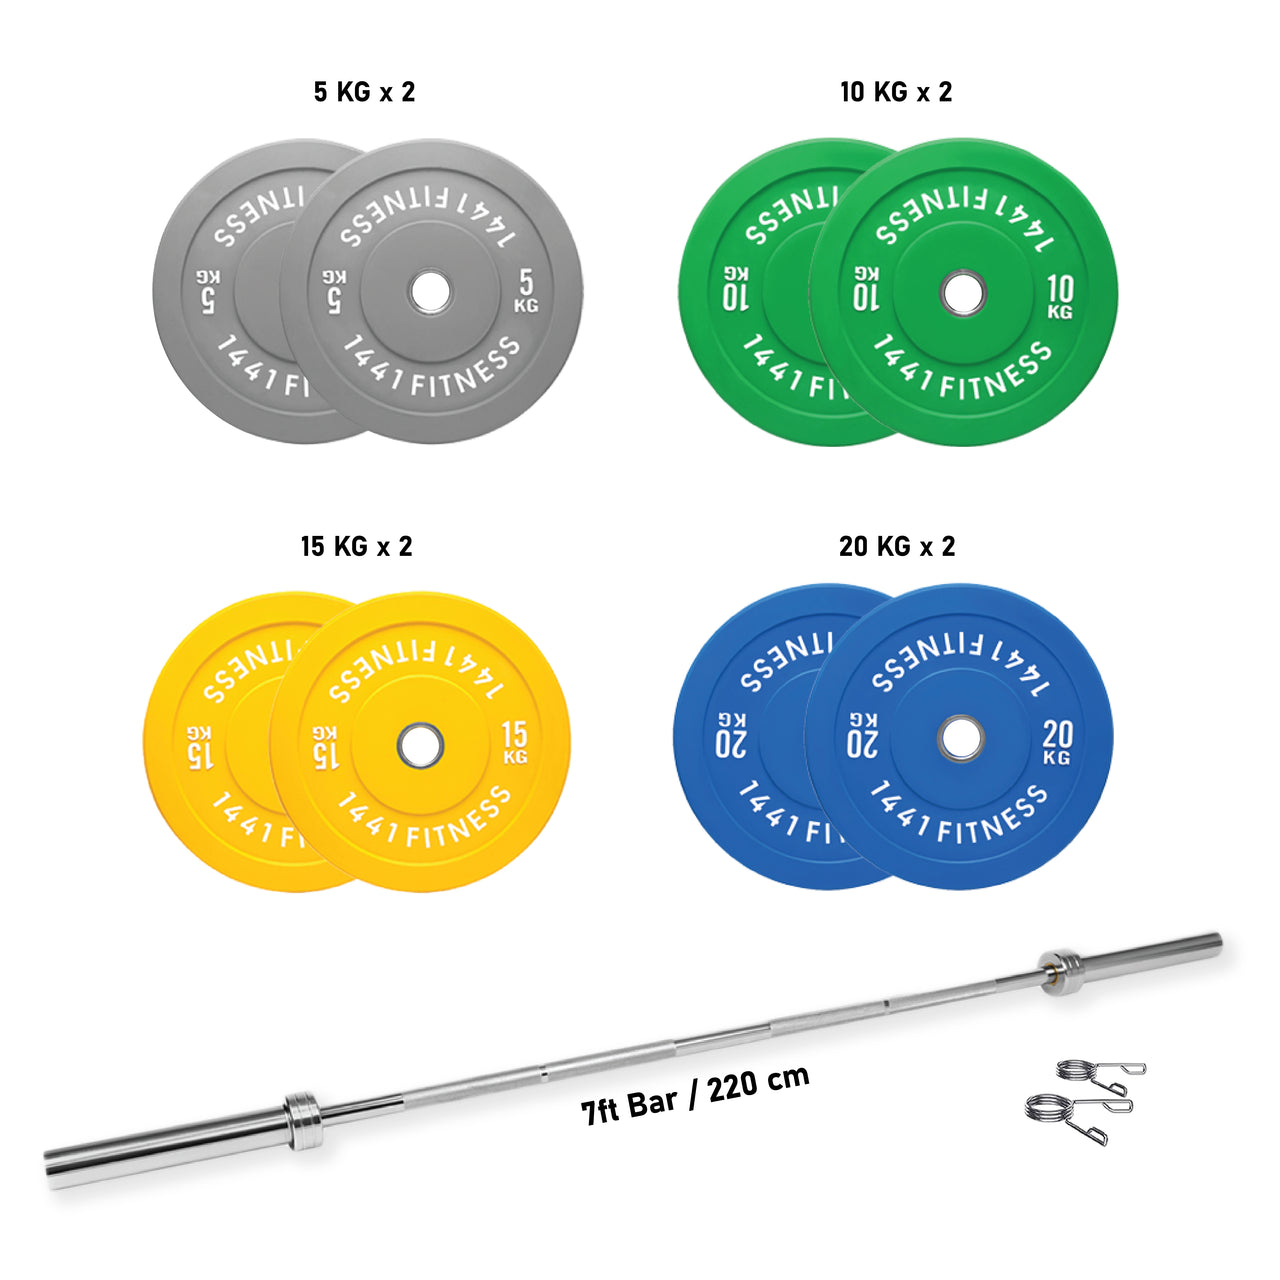 7 Ft Olympic Barbell and Color Bumper Plate Set - 120 Kg | 1441 Fitness